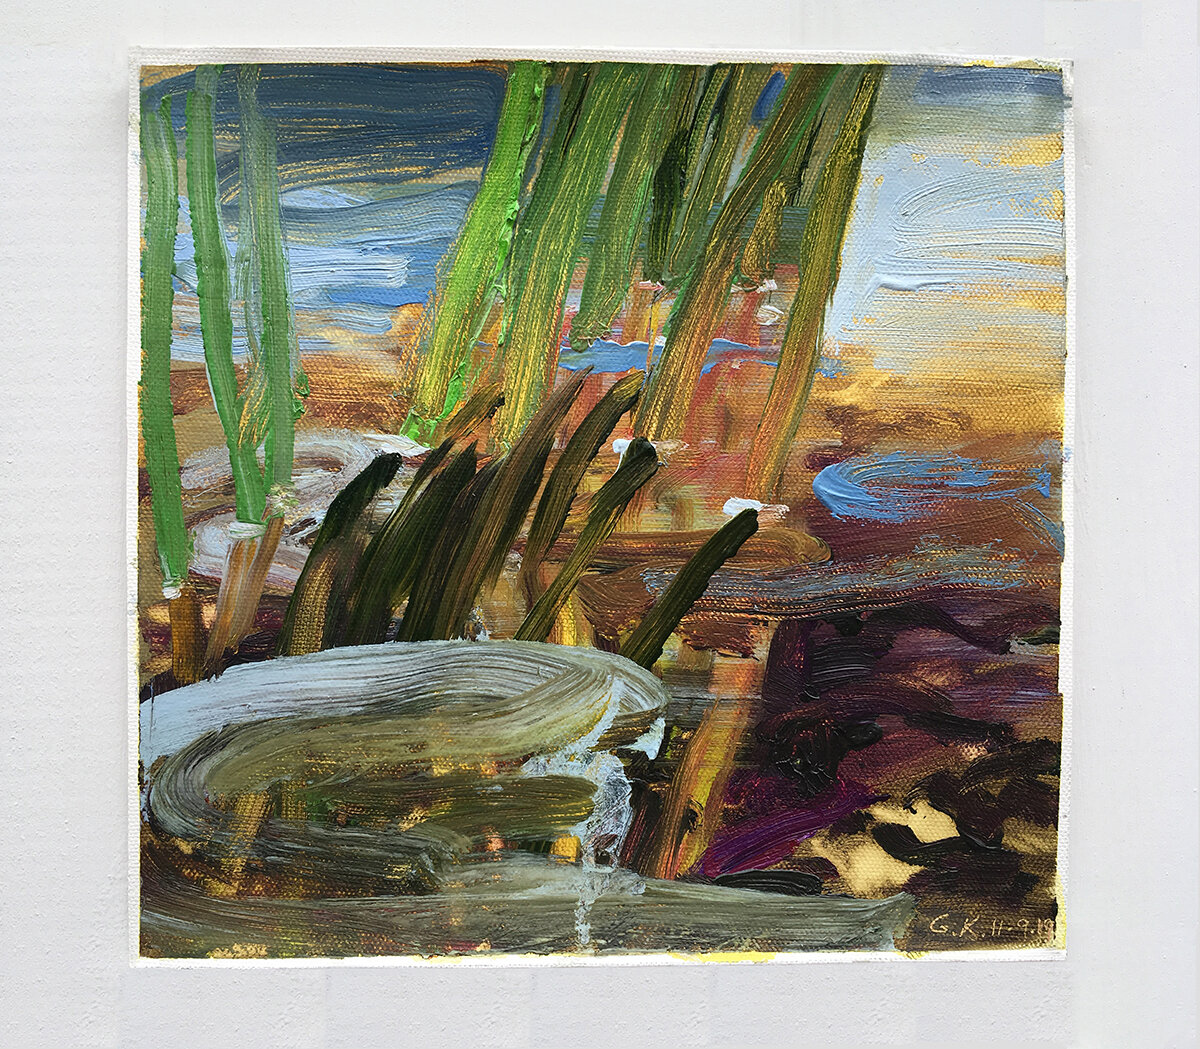   Study for Pond on Wheels X   Oil on canvas 8 ¼ x 8 ¾ inches  21 x 22 cm 2019 